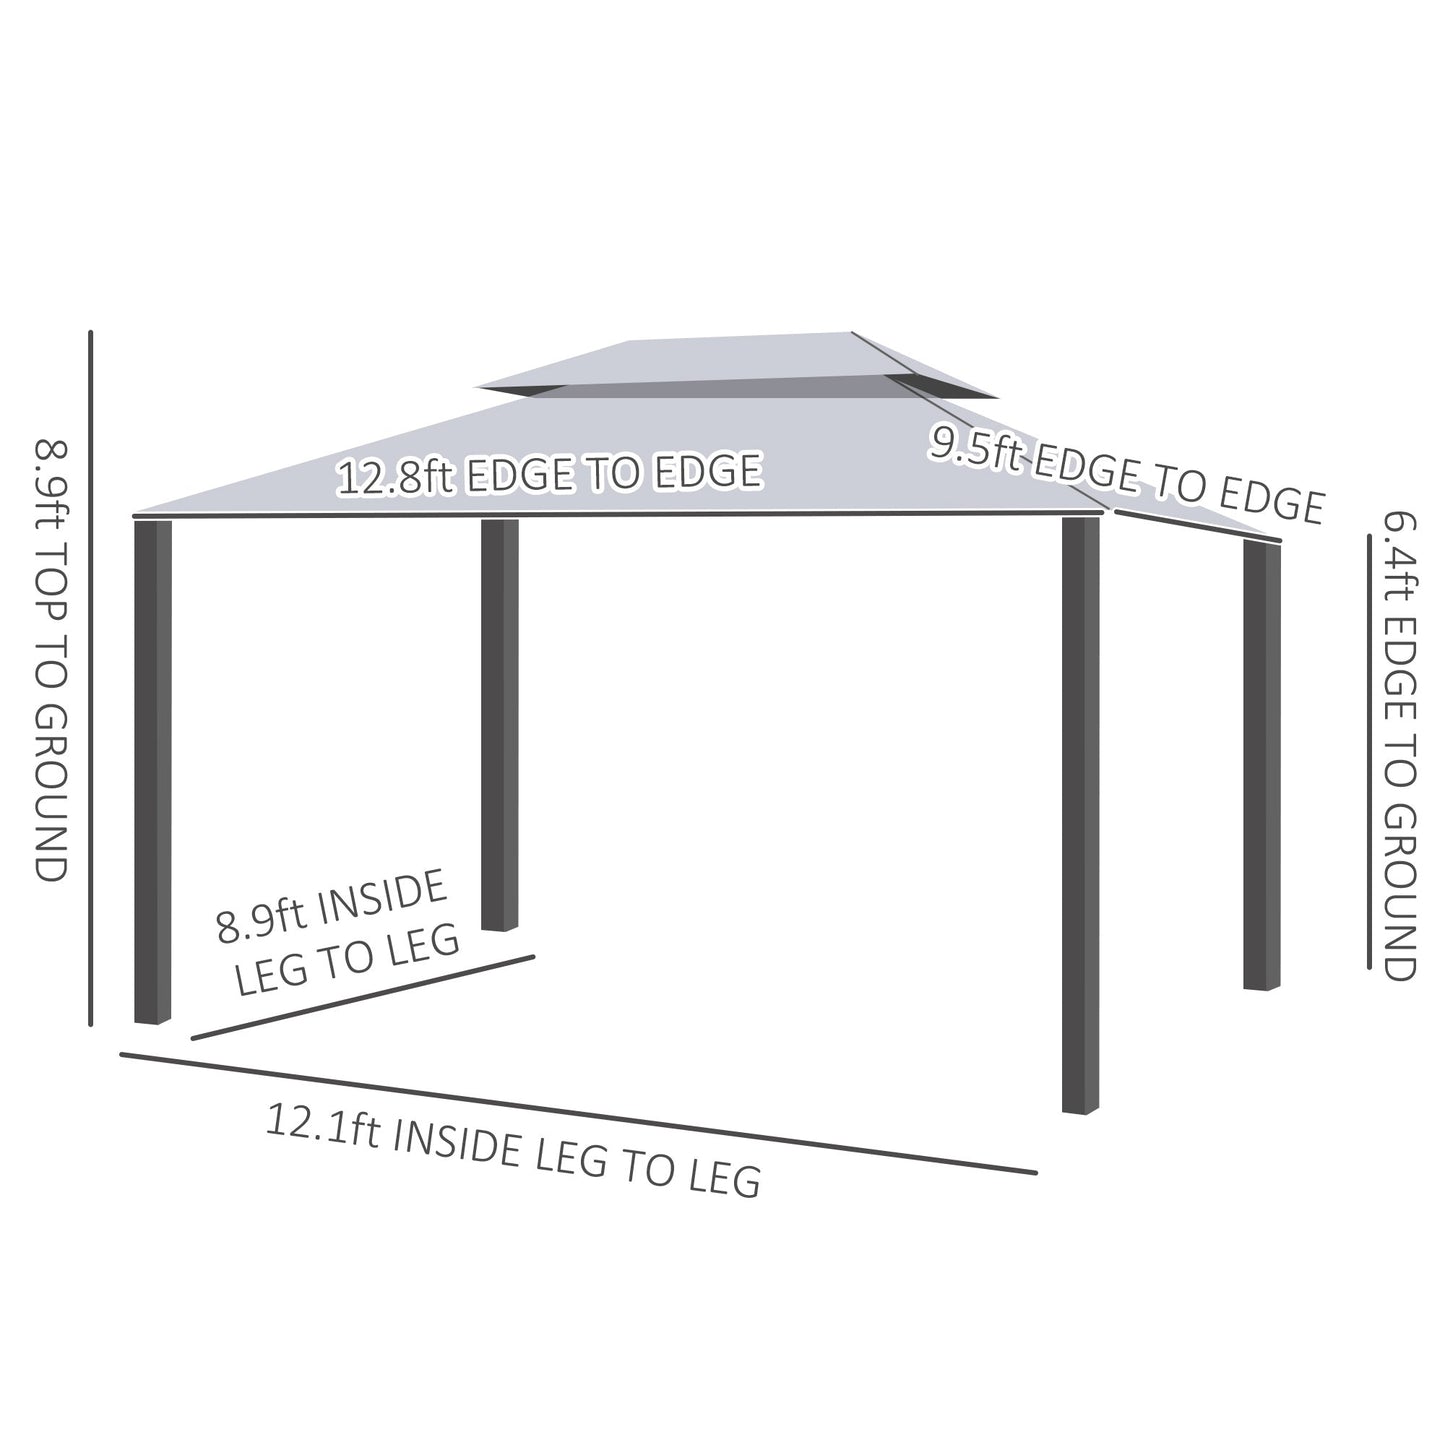 Outdoor and Garden-10' x 13' Patio Gazebo, 2-Tier Polyester Roof, Vented Canopy, Mesh, Portable Aluminum Frame for Outdoor, Grey - Outdoor Style Company